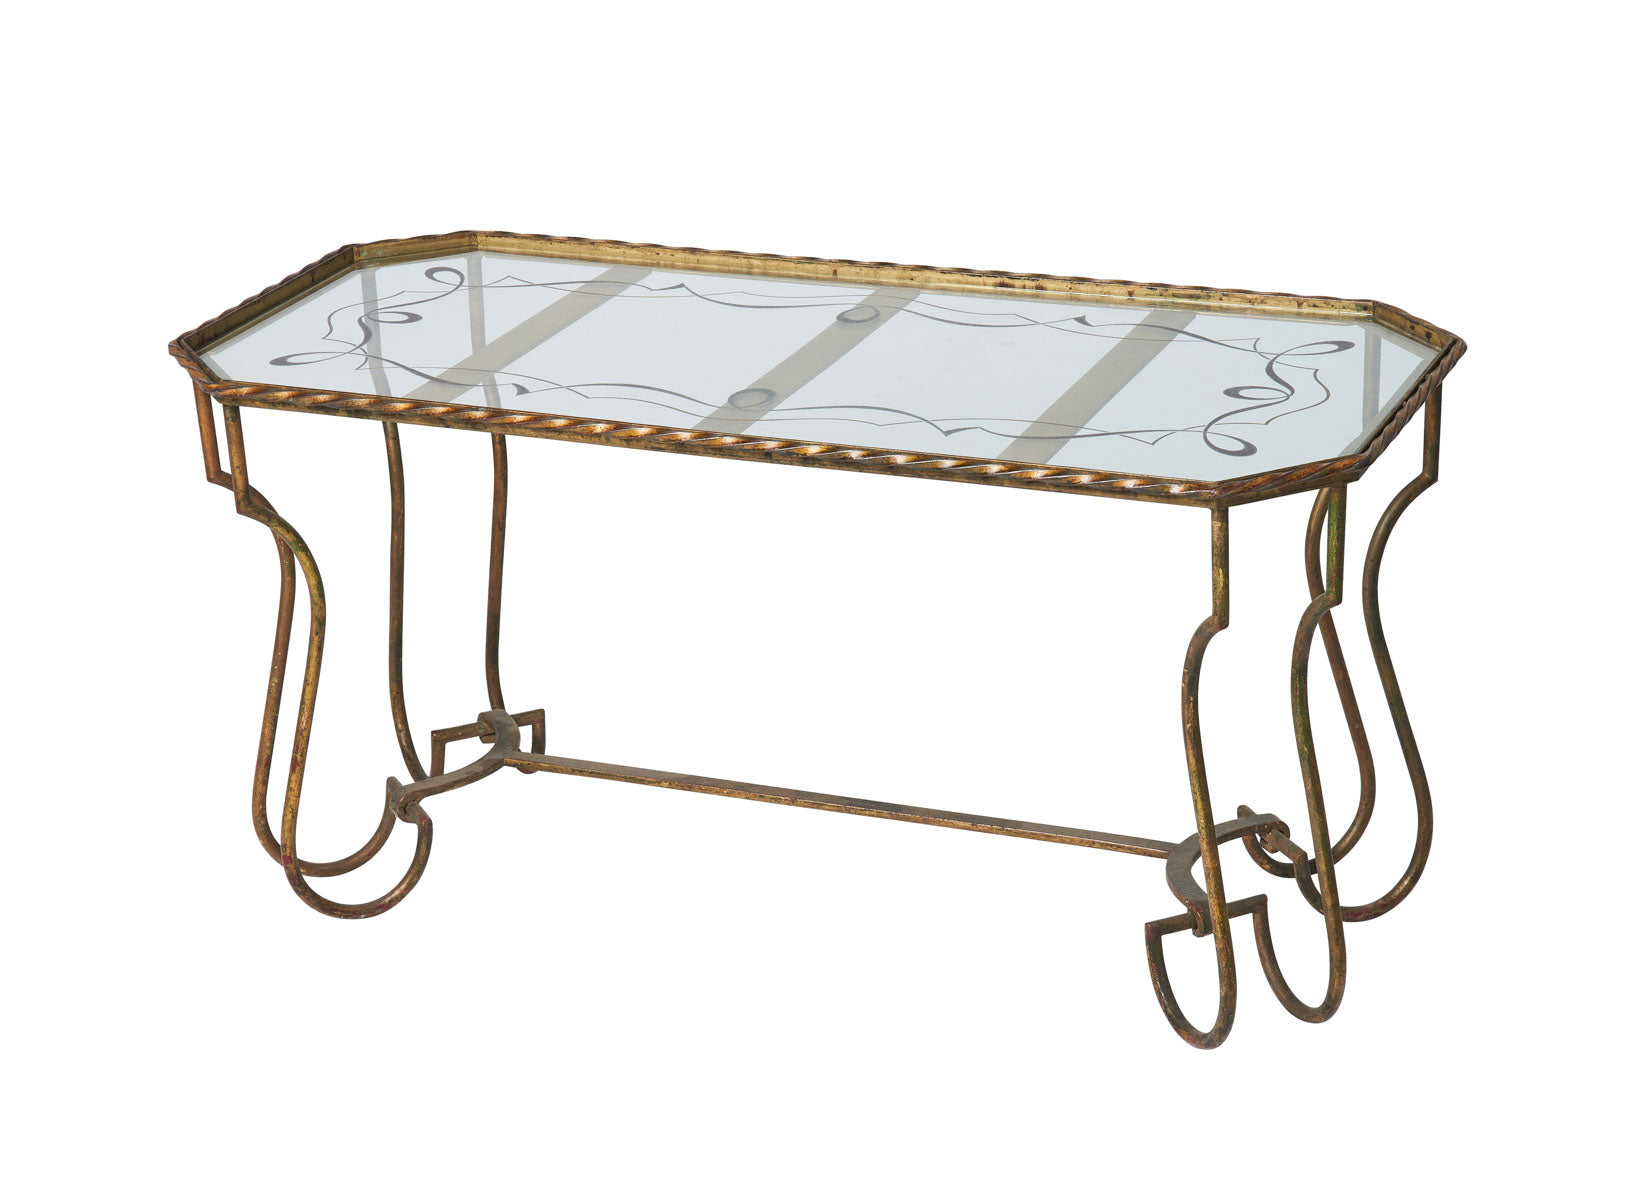 SOLD A pretty verre-eglomise and gilt metal coffee table with scrolling leg base, French Circa 1940